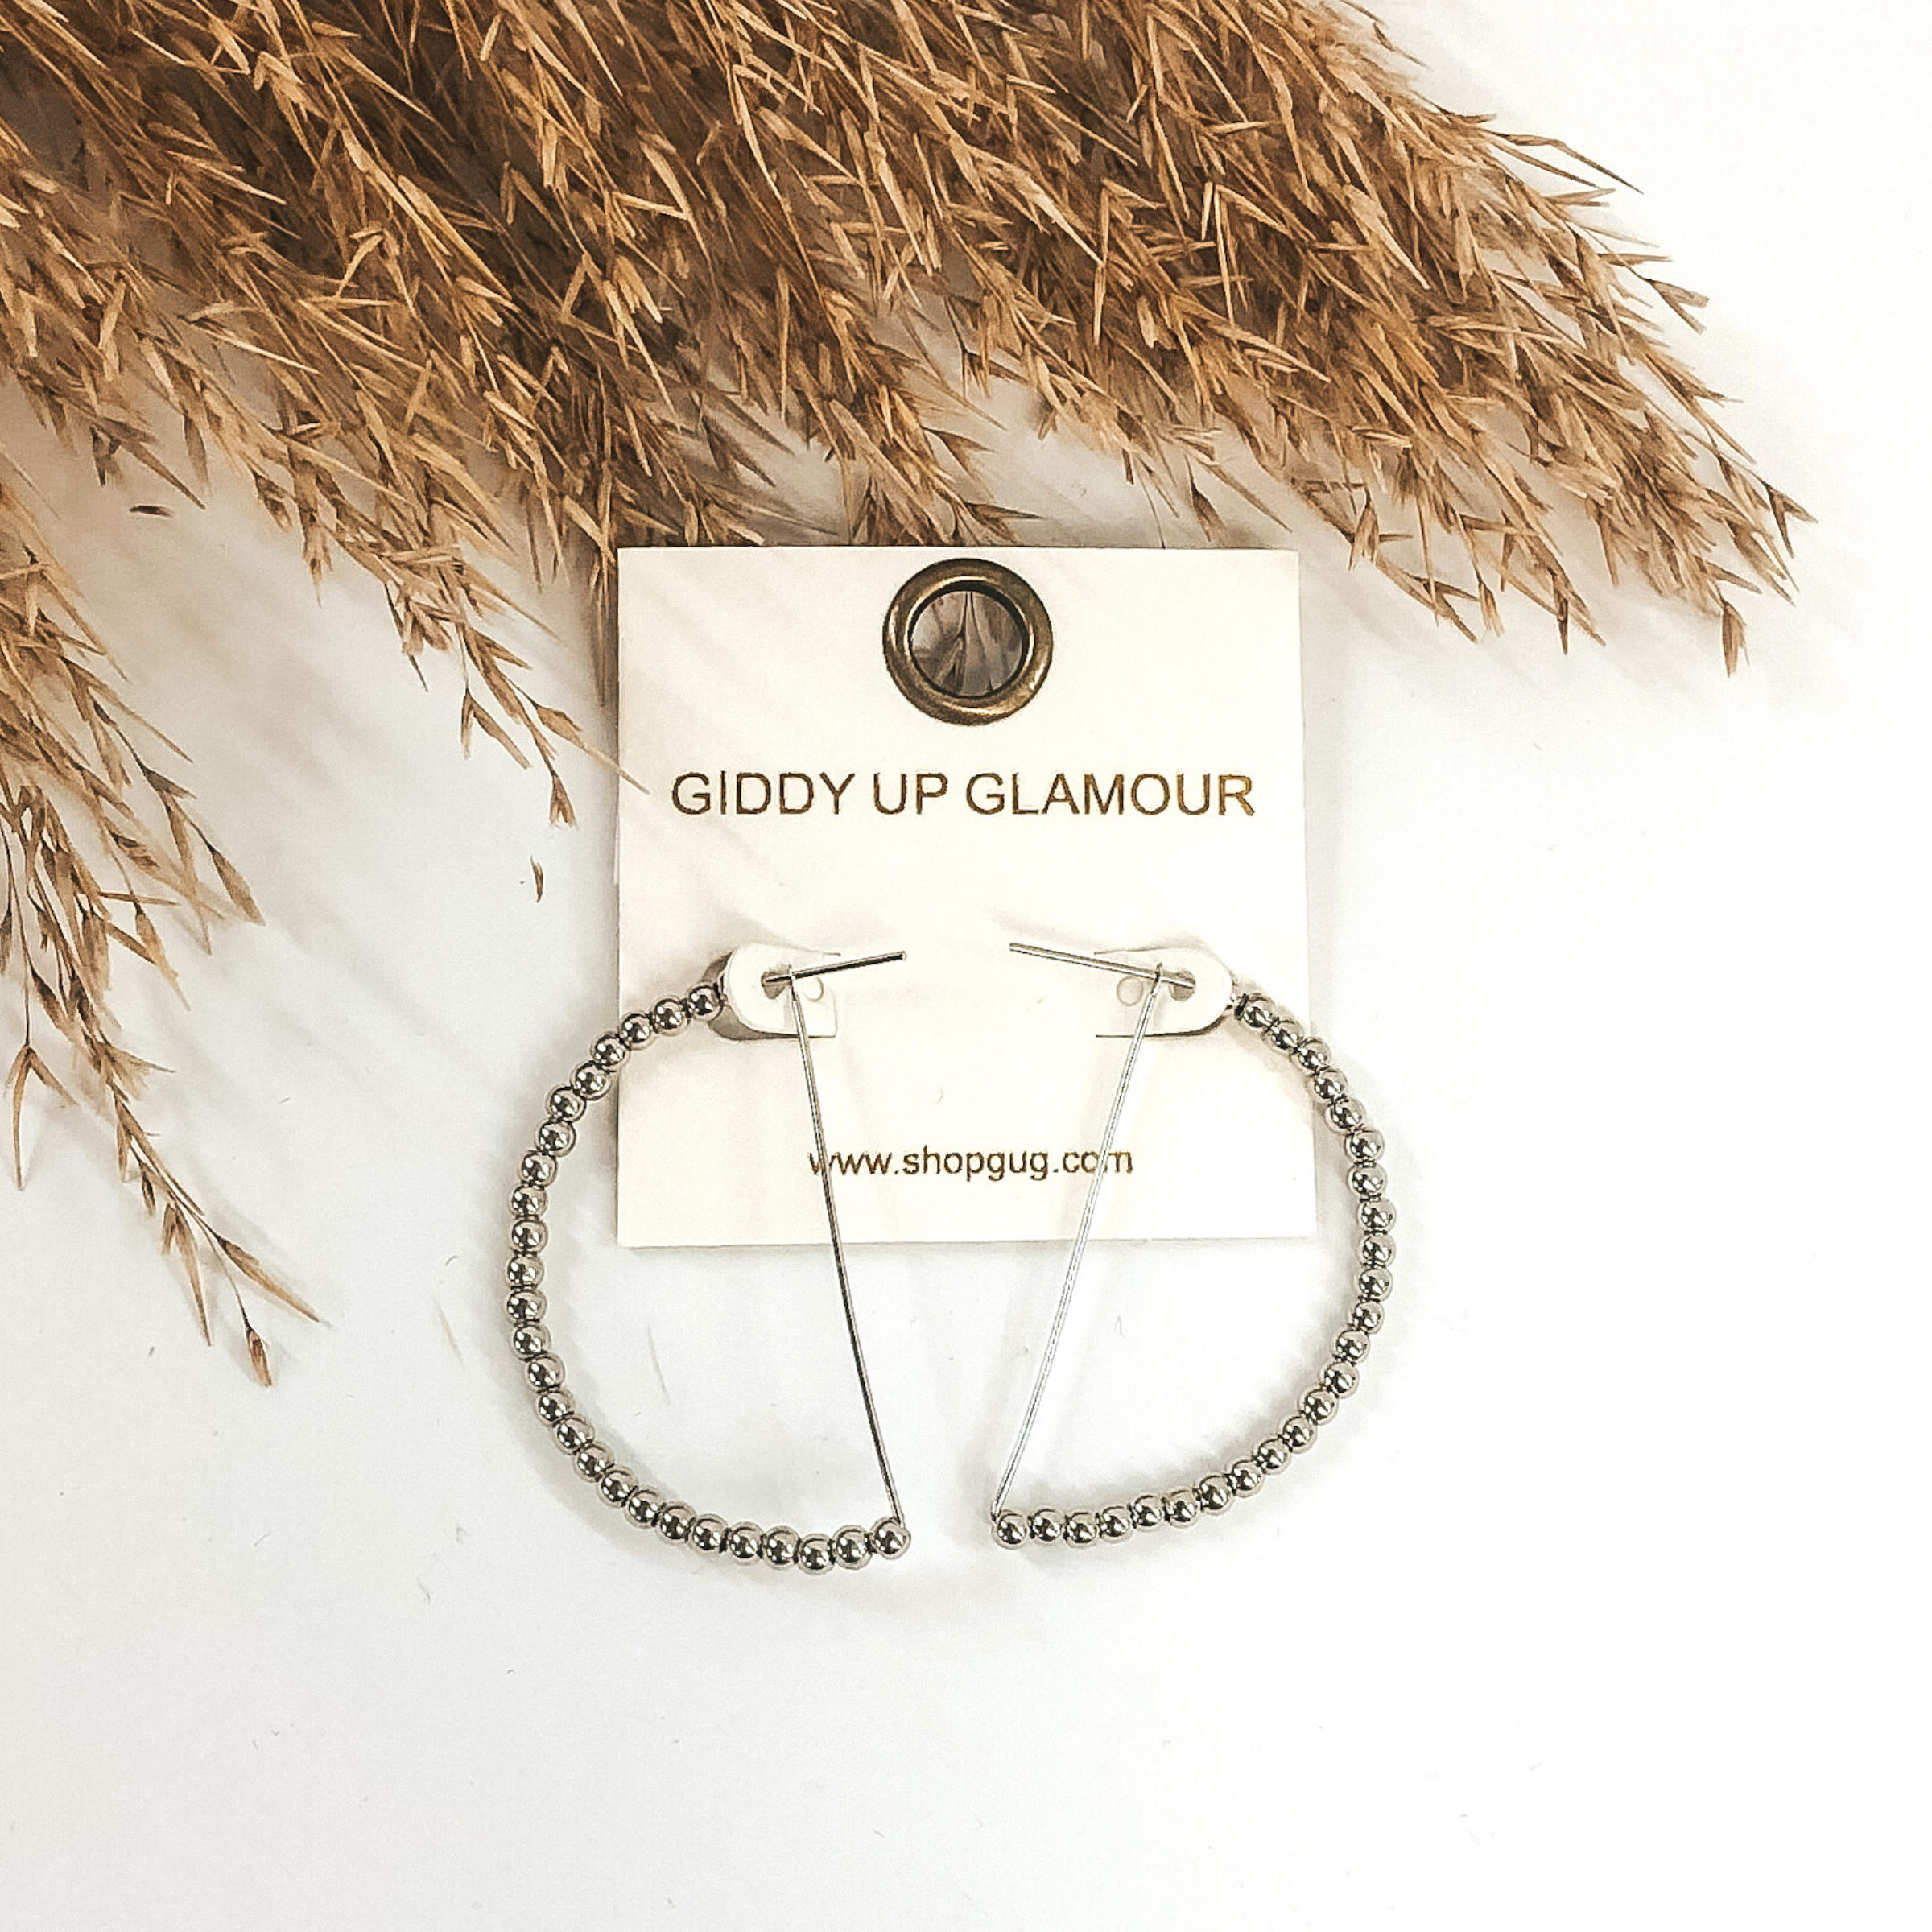 Silver semi circle hoop earrings with the curved part covered in silver beads. These earrings are pictured on a white background with tan floral at the top of the picture.